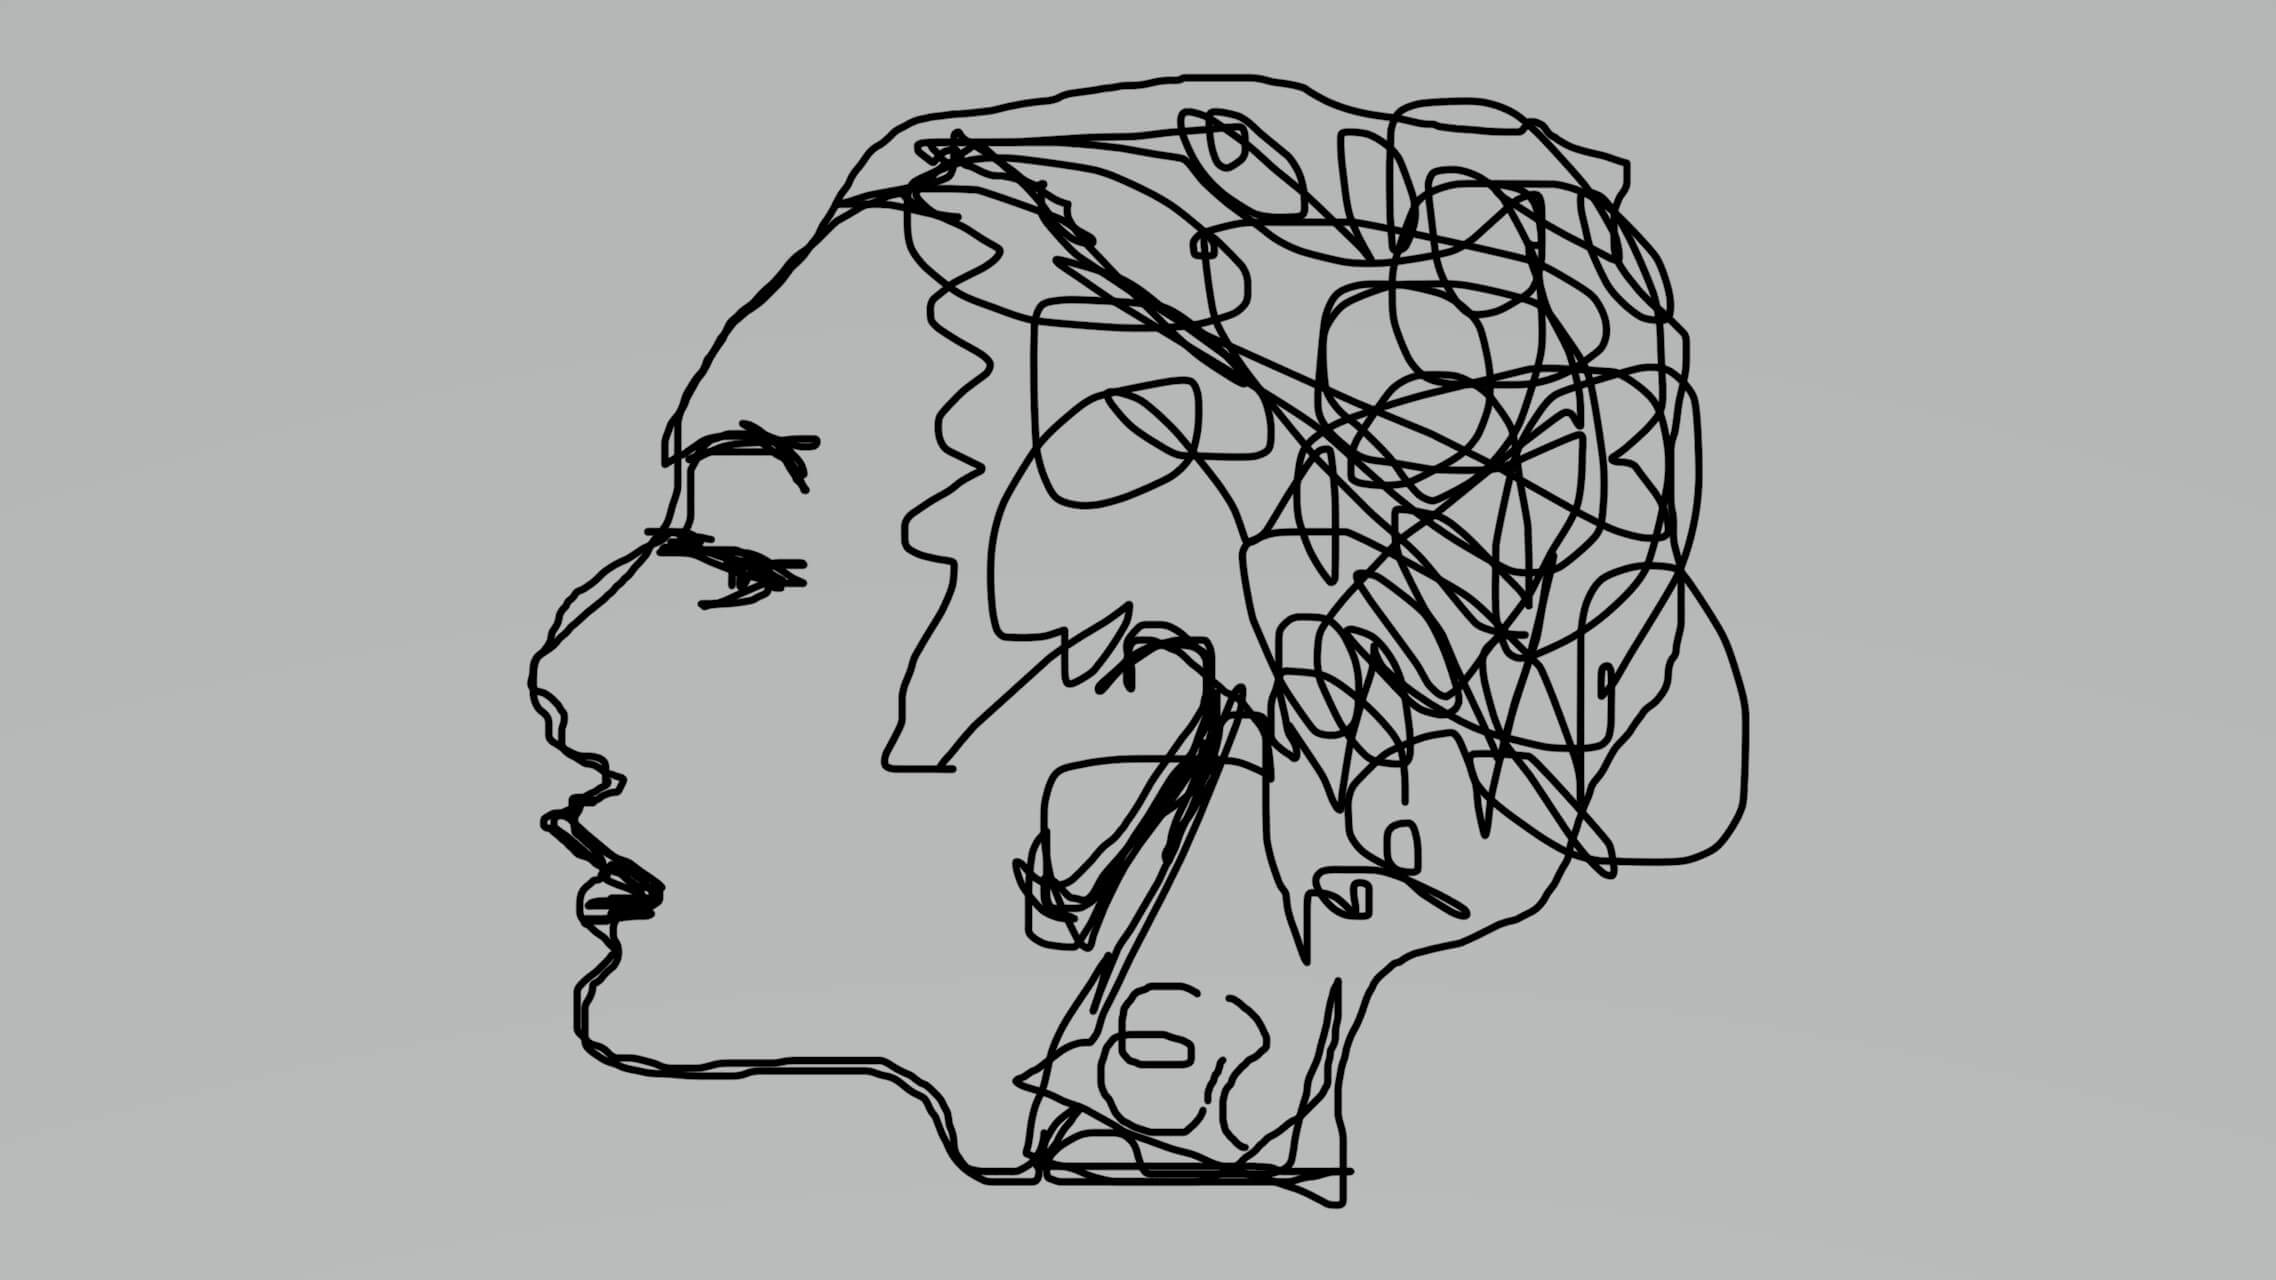 doodle-style drawing of woman's head